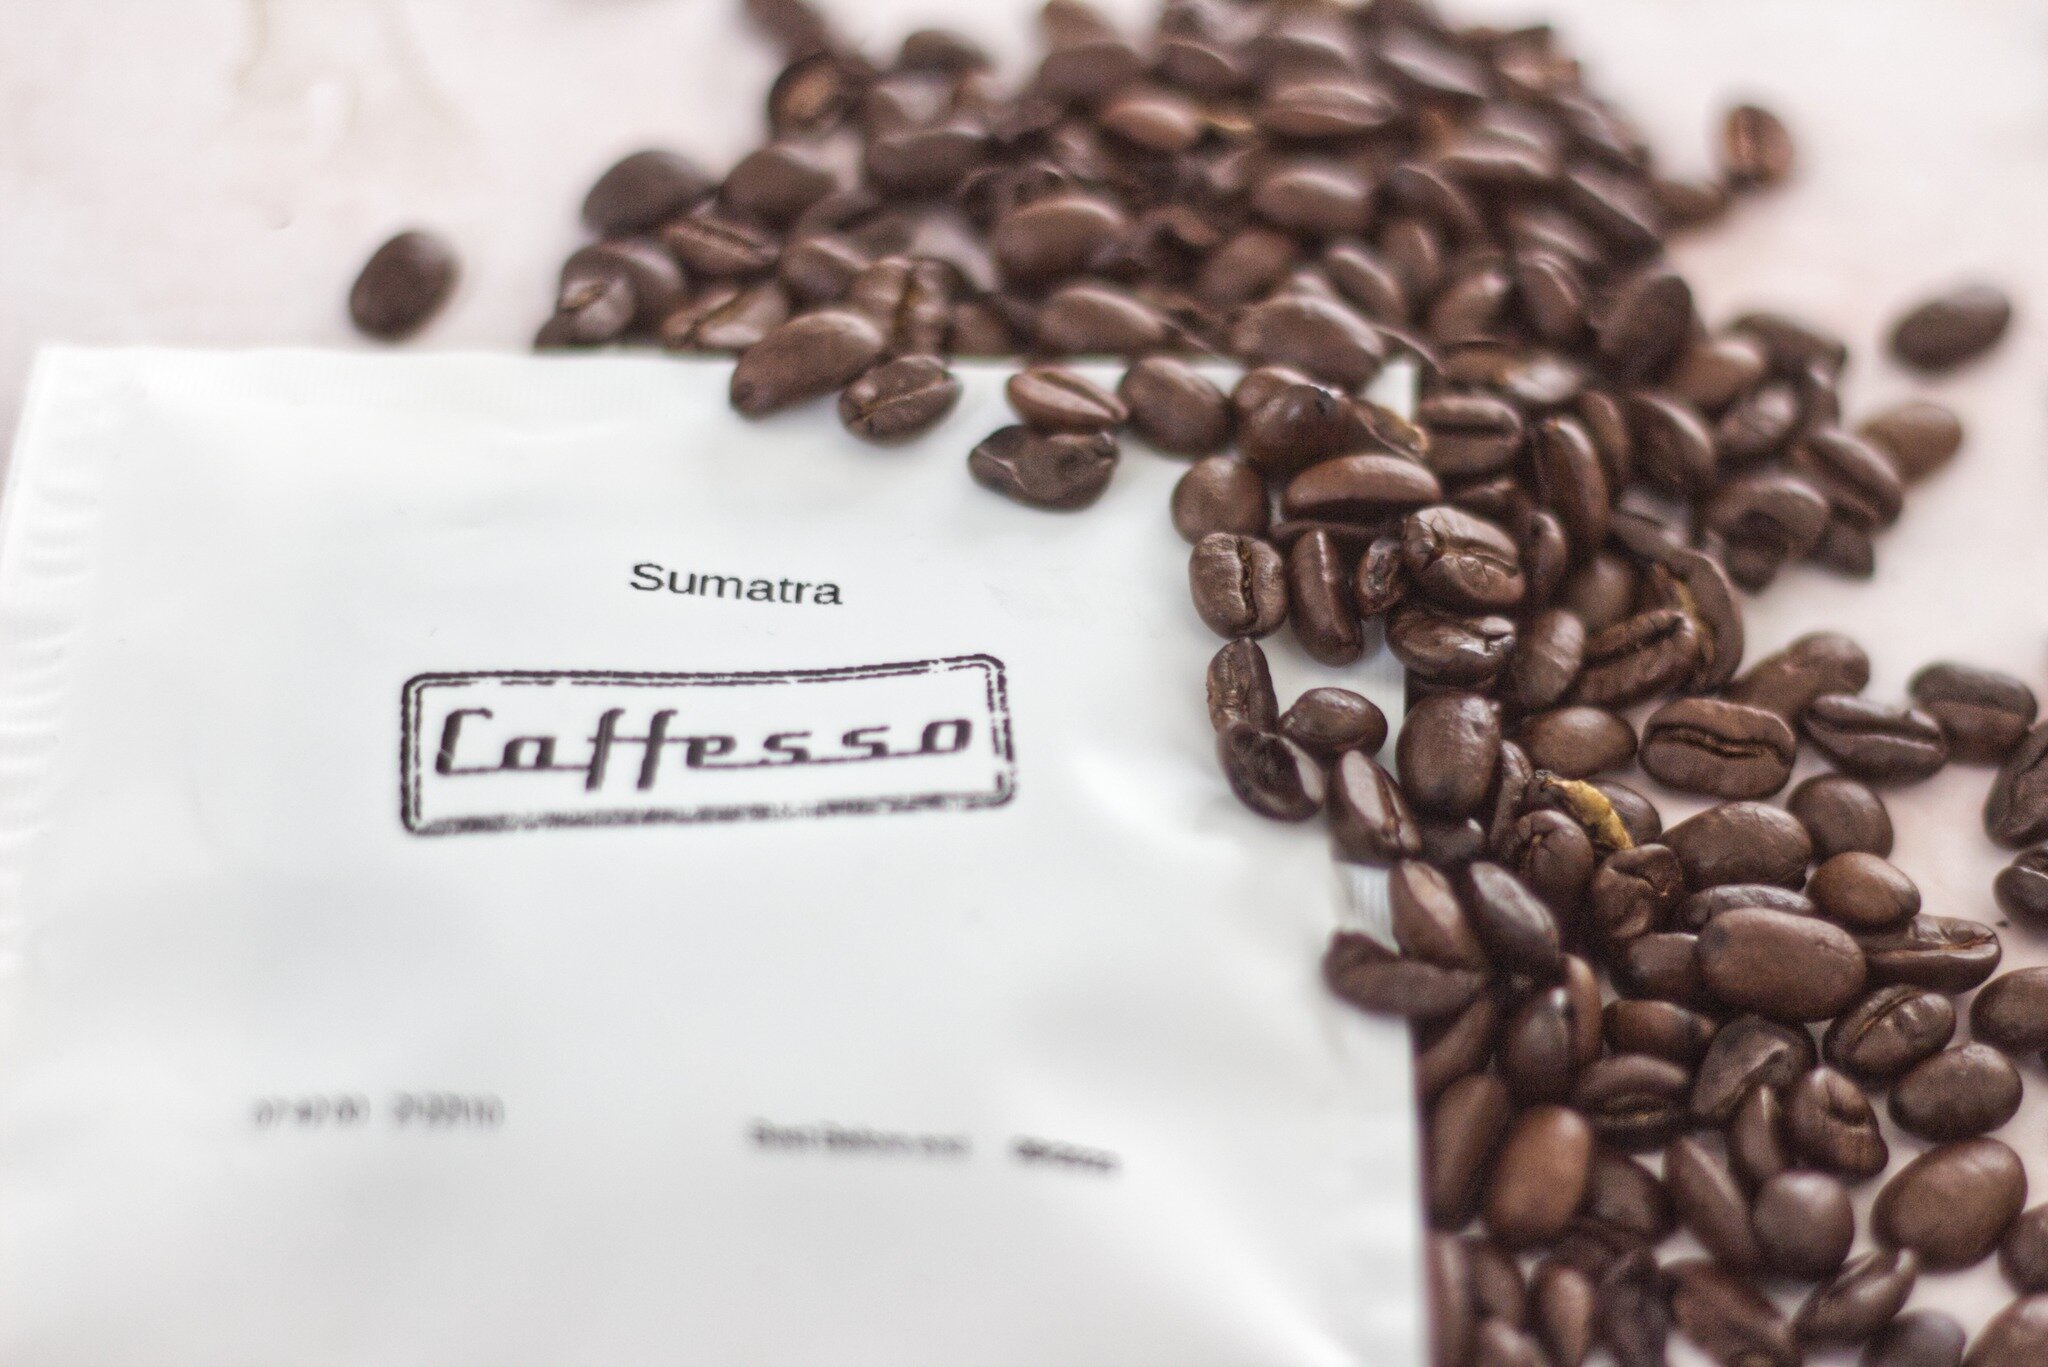 From Sumatra, the largest island in the Republic of Indonesia and packed full of Typica, Linie-S, Caturra and Catimor varieties of Arabica bean. The distinctive processing method of Gilling Bash defines this Sumatran profile. ☕

 #coffeebag #coffeeba